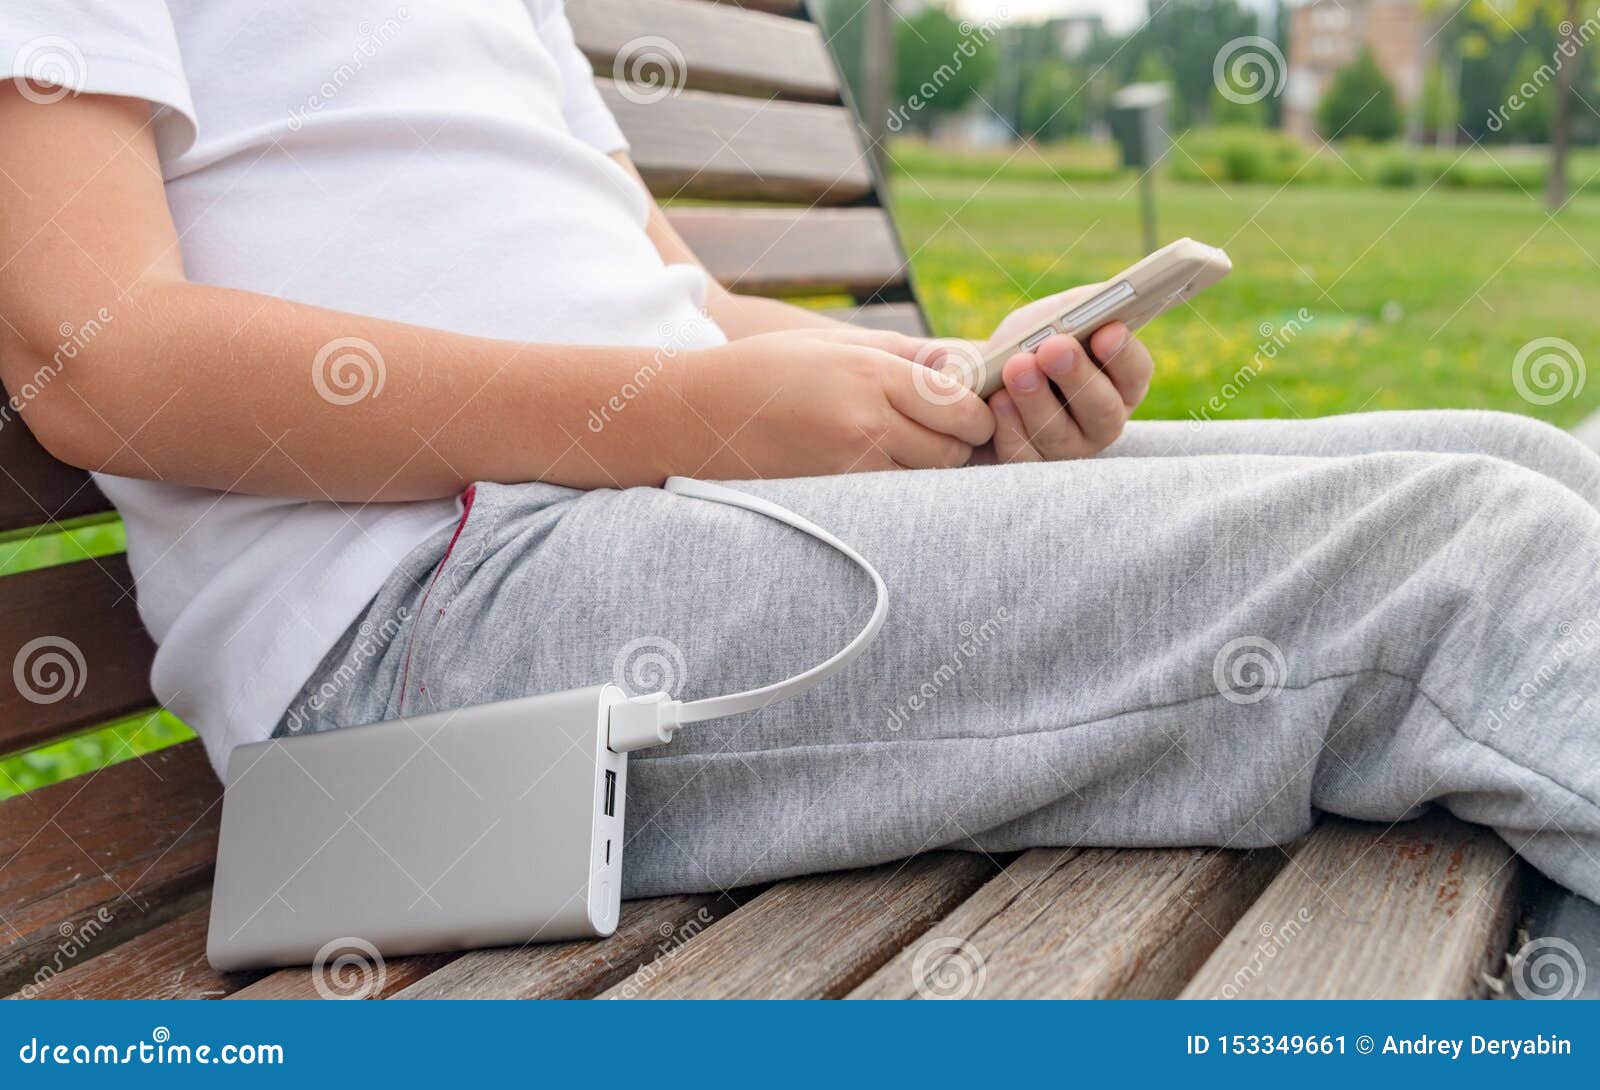 Boy using phone while charging from the power bank. Boy using phone on the bench while charging from the power bank